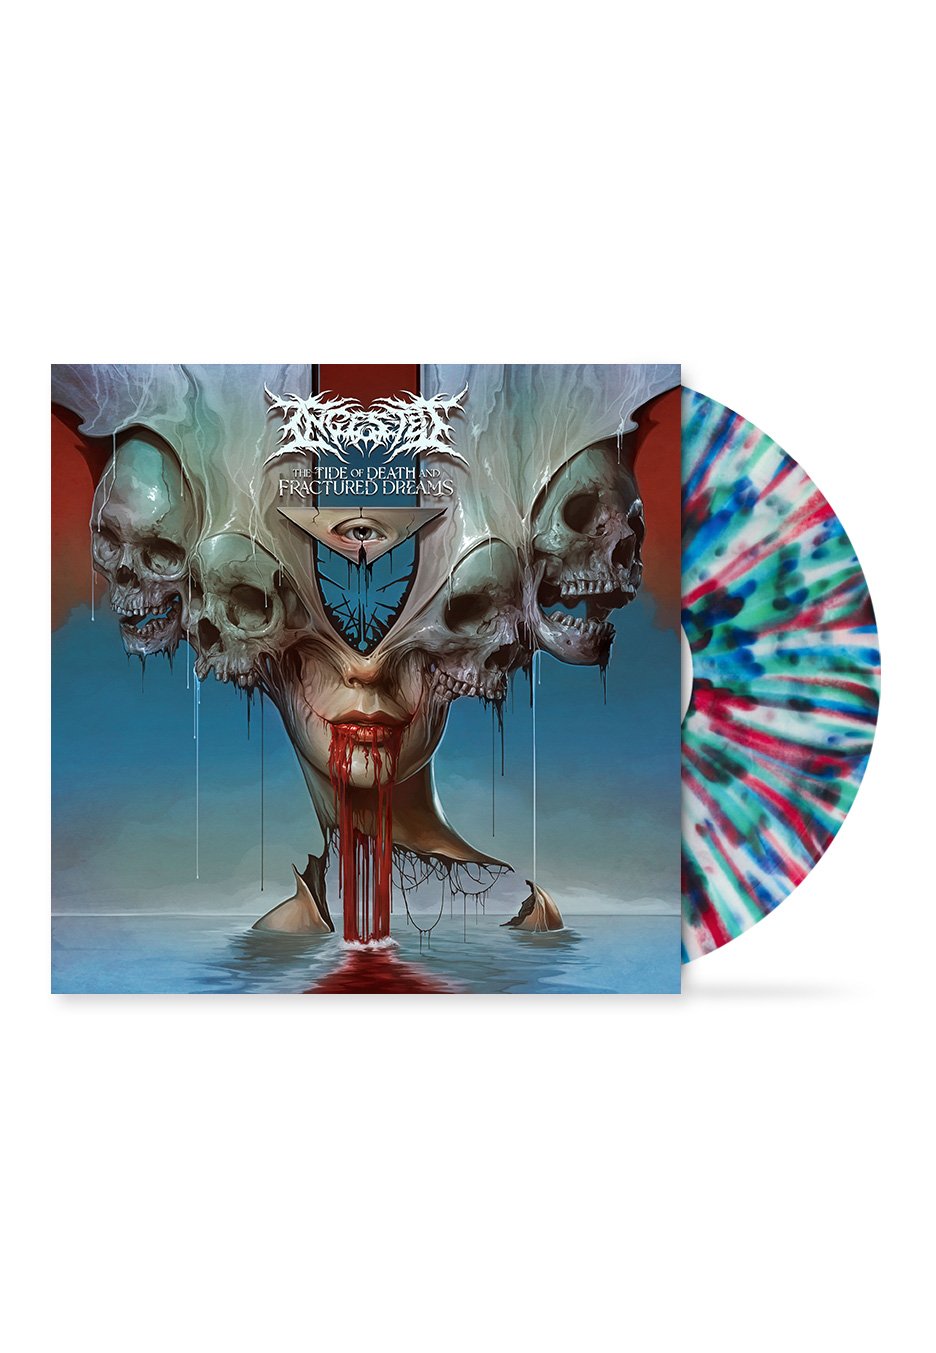 Ingested - The Tide Of Death And Fractured Dreams Transparent White w/ Blue/Green & Red - Splattered Vinyl